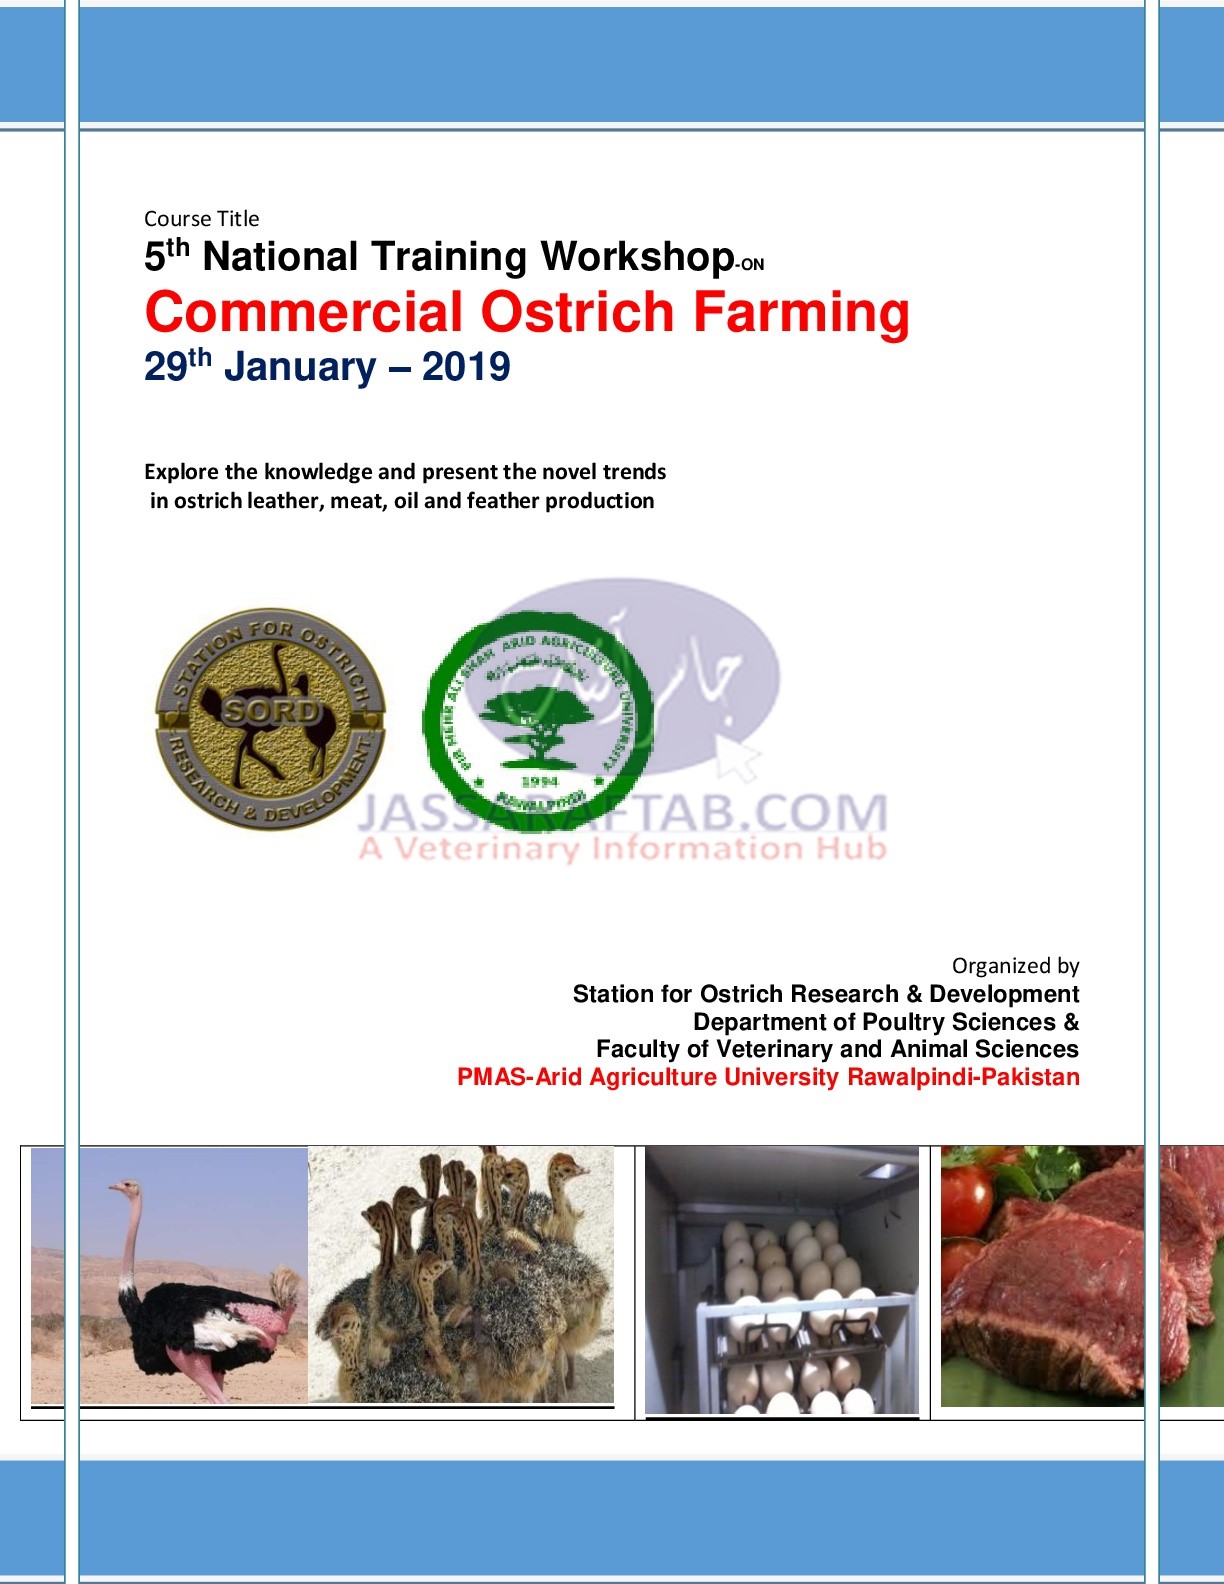 National Training Workshop on Commercial Ostrich Farming